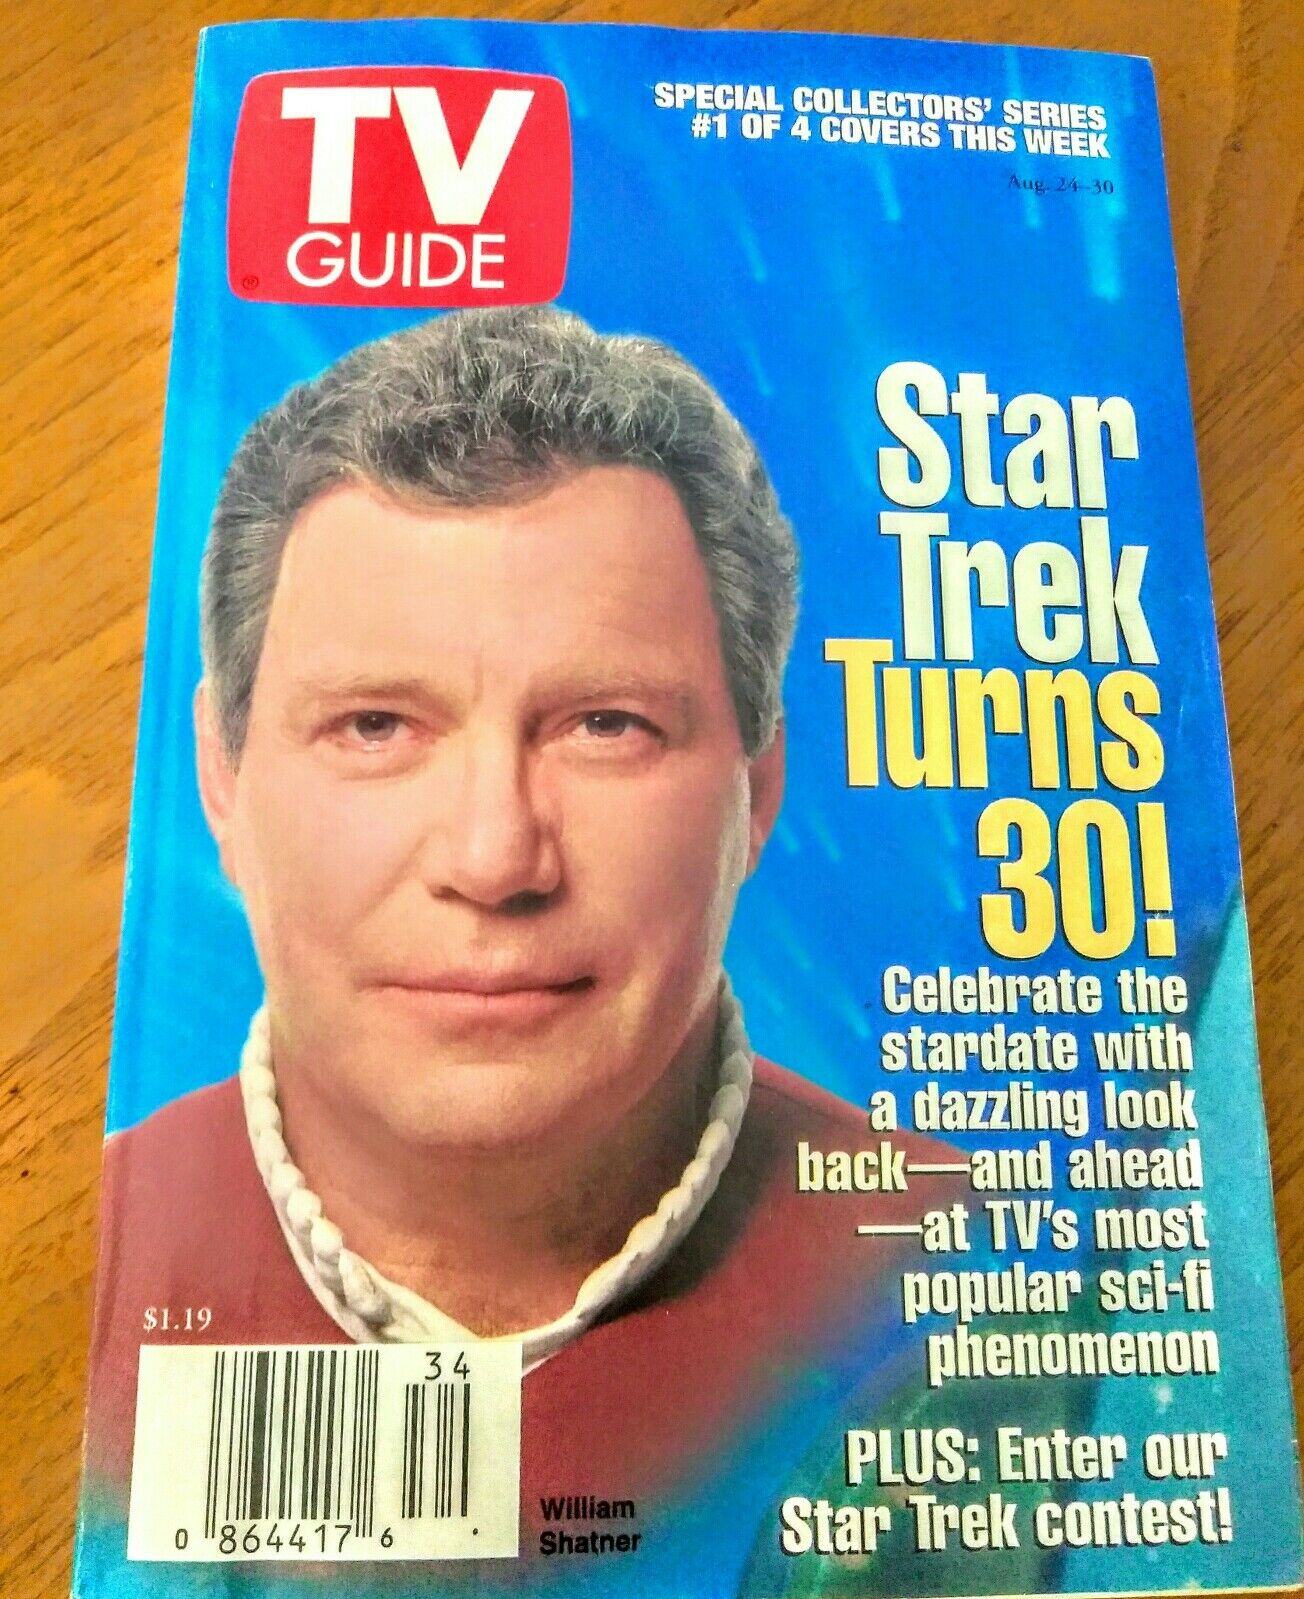 TV Guide Star Trek Turns 30 August 24-30 1996 Issue Special Collectors Series #1